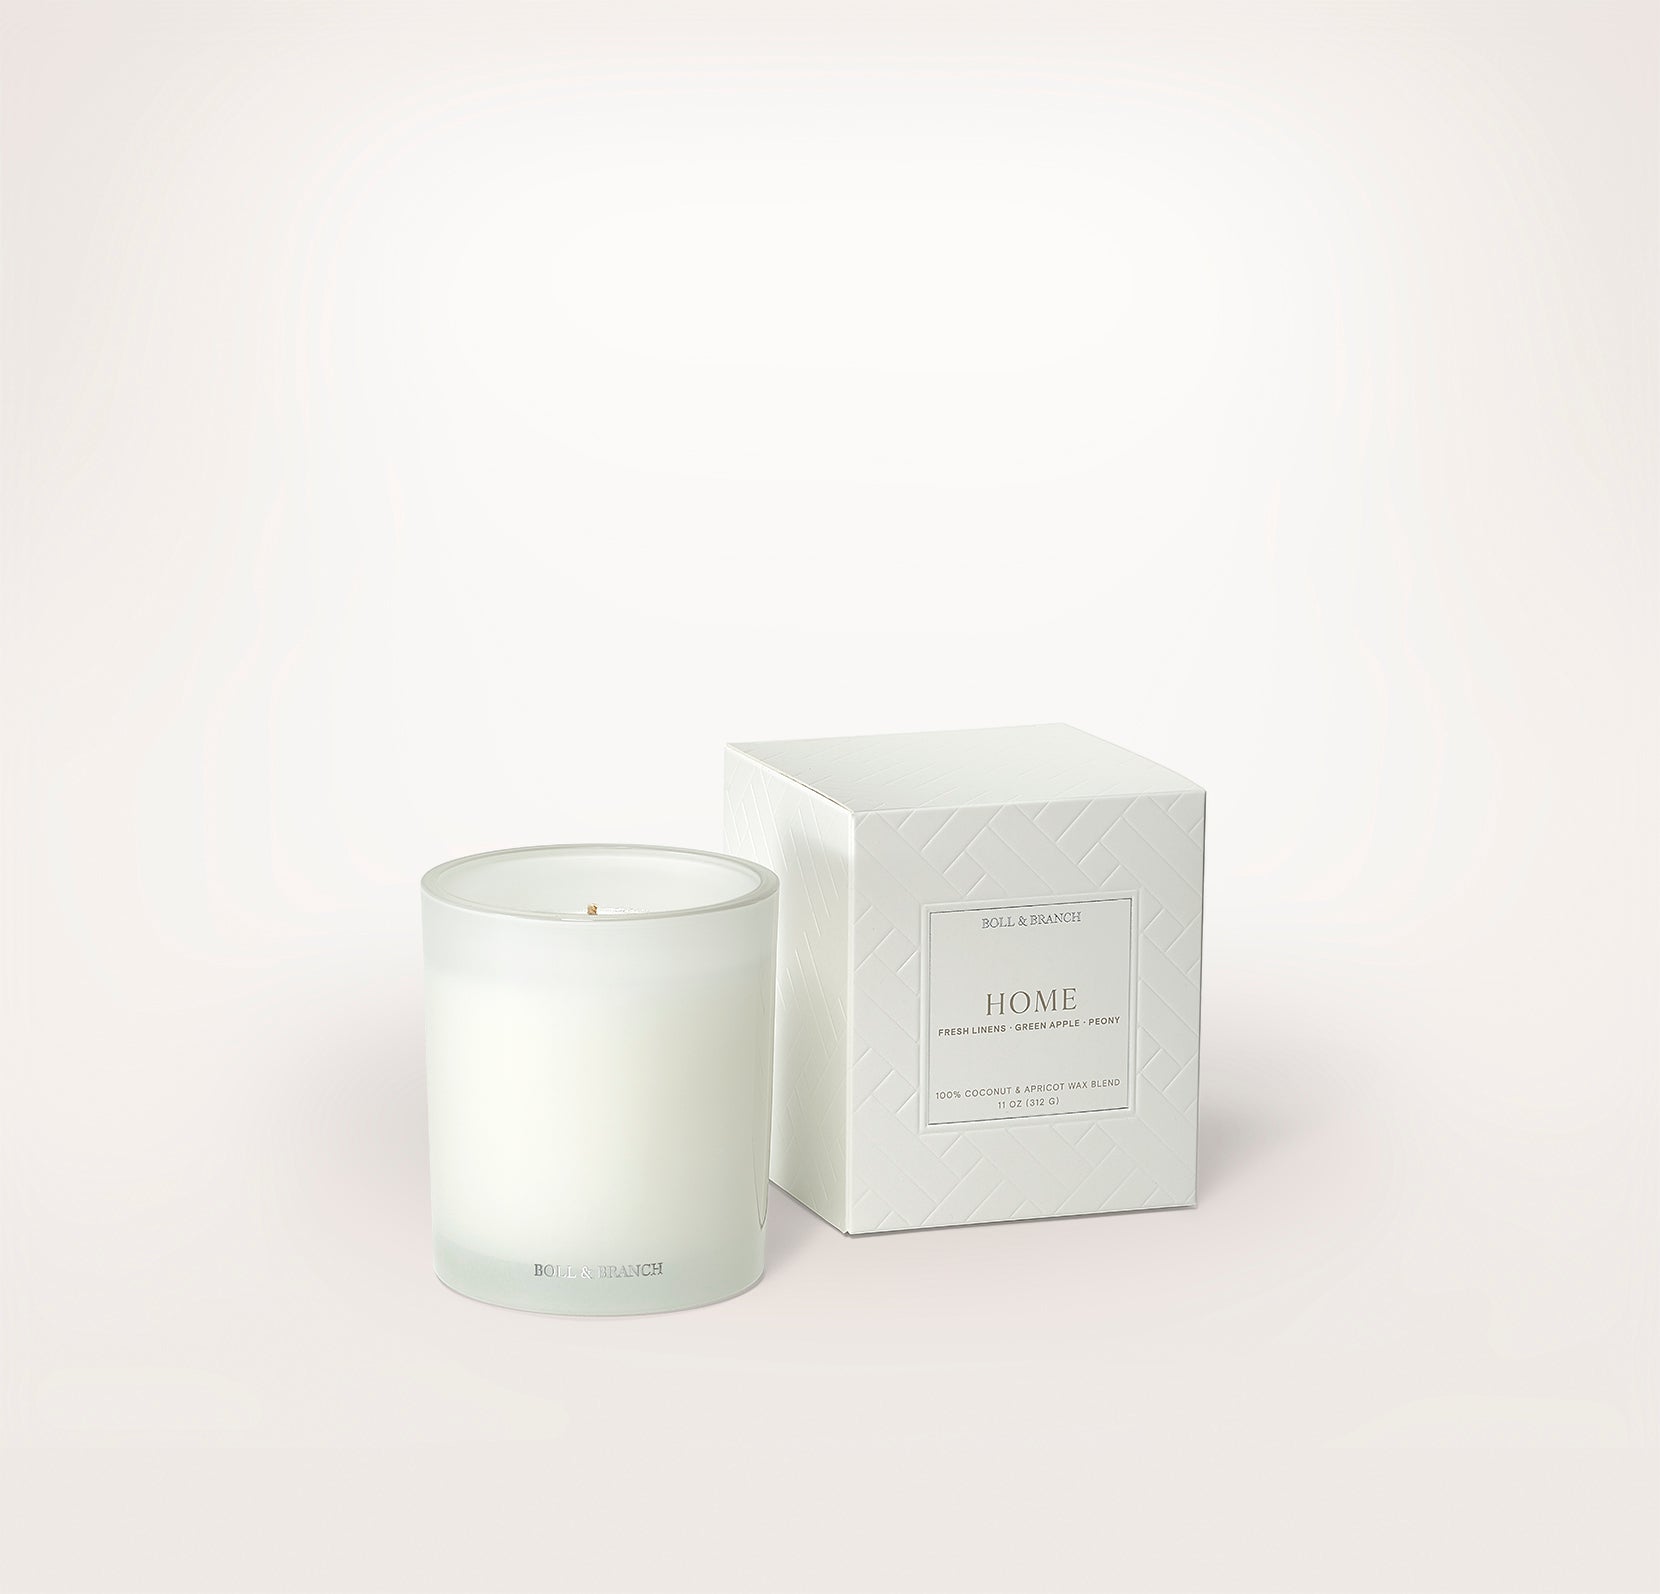 Single Wick Candle in Home